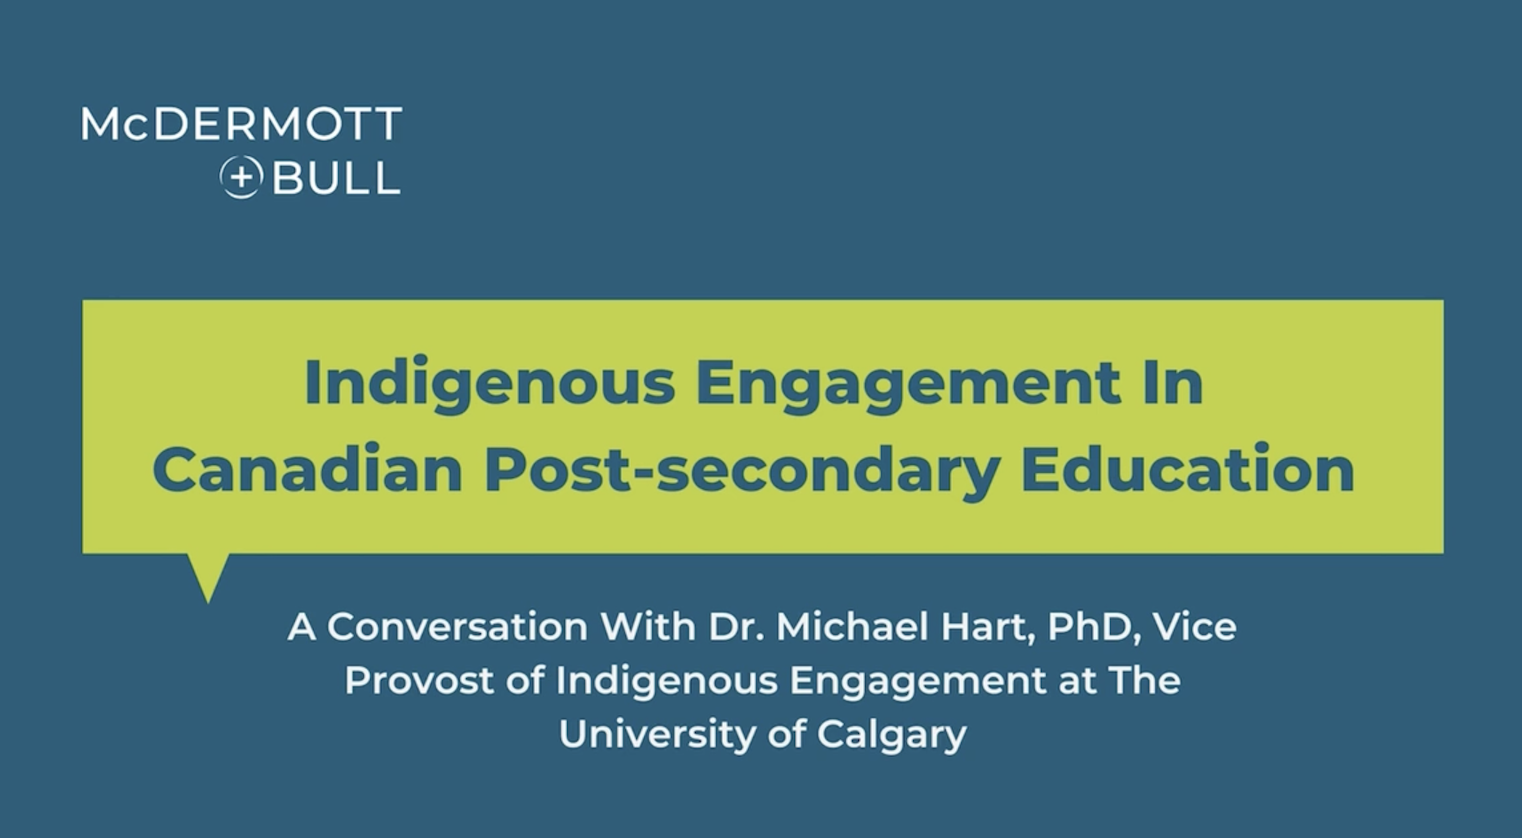 A Conversation on Indigenous Engagement in Canadian Post-Secondary Education